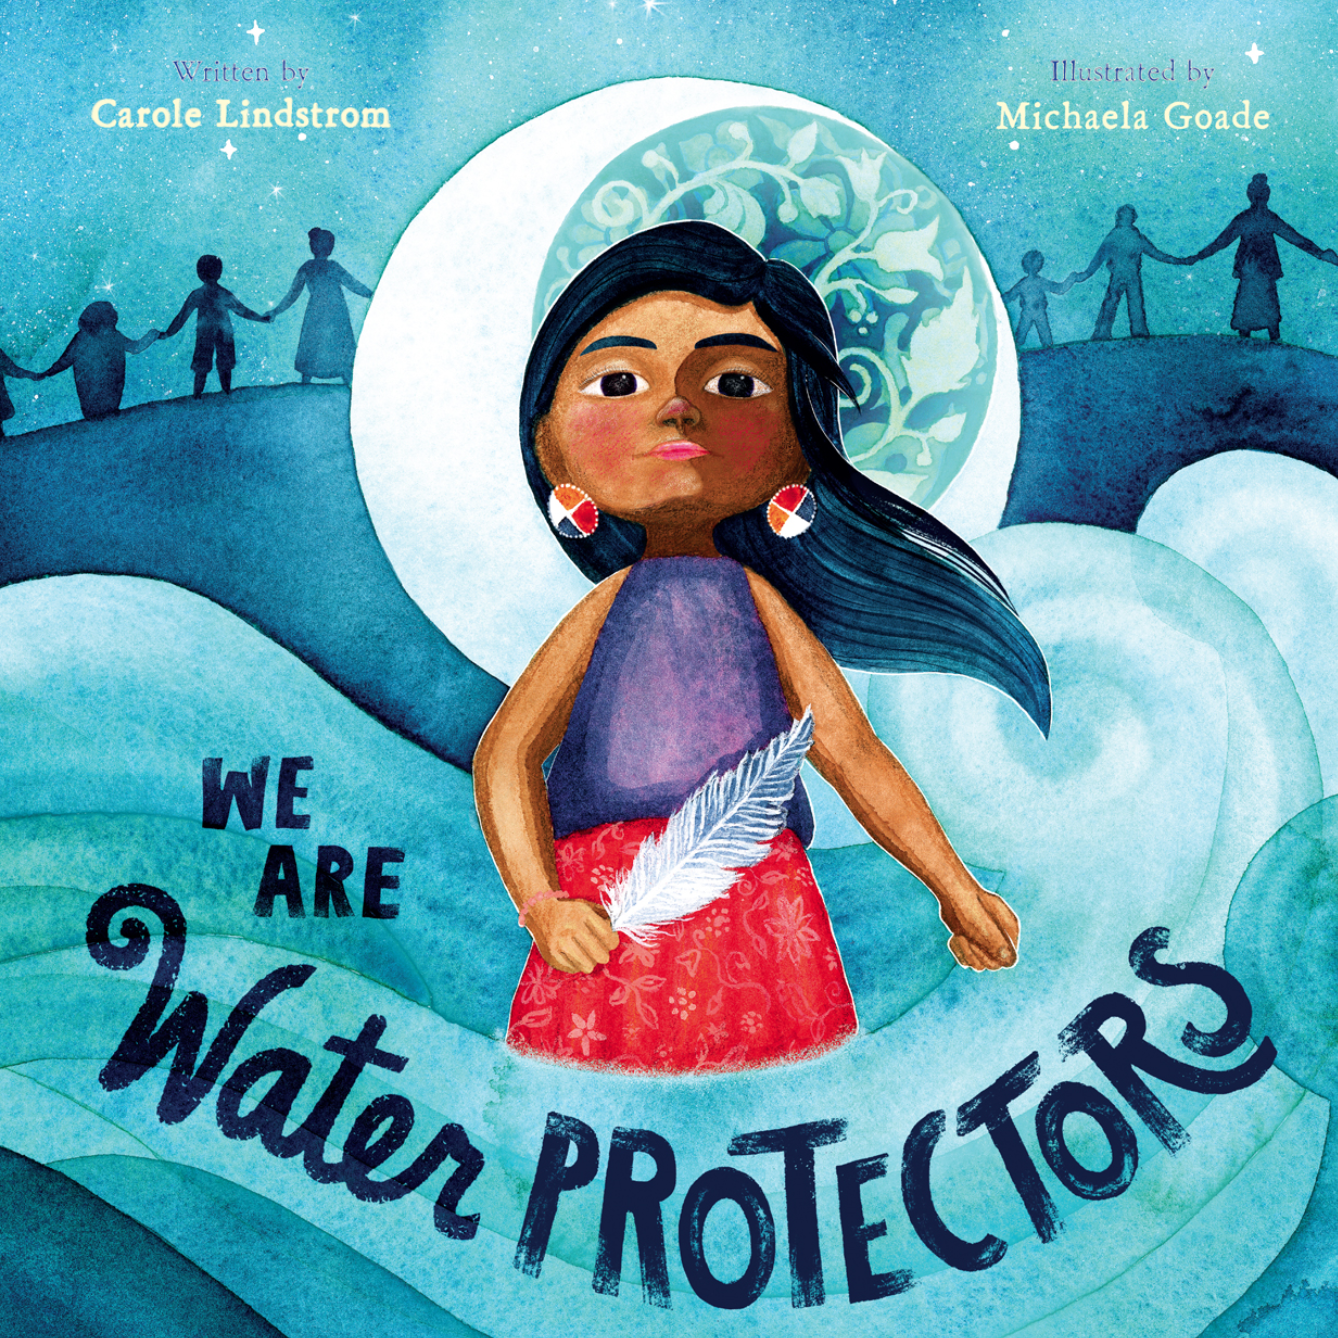 The cover of a book called "We are Water Protectors."